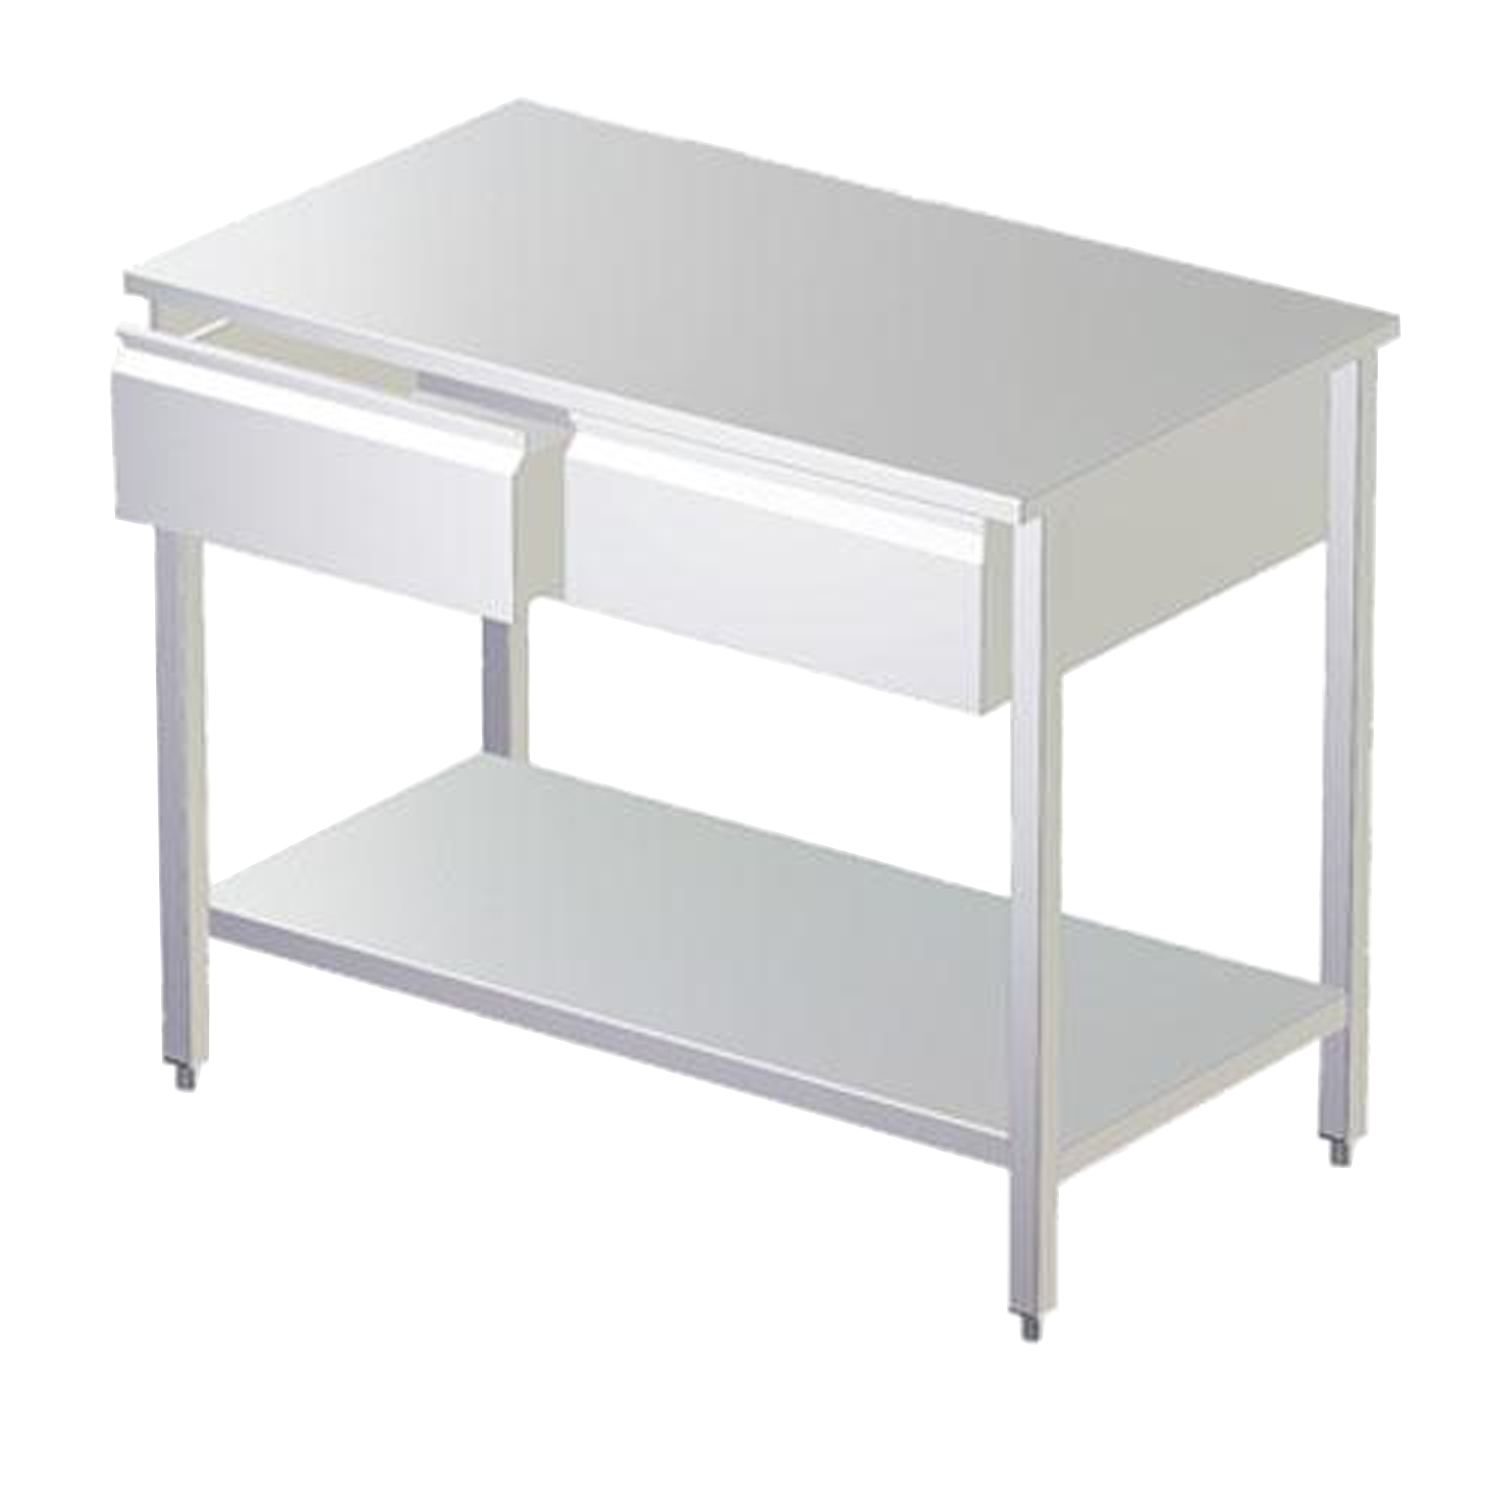 Stainless Steel Exam Table with Drawers